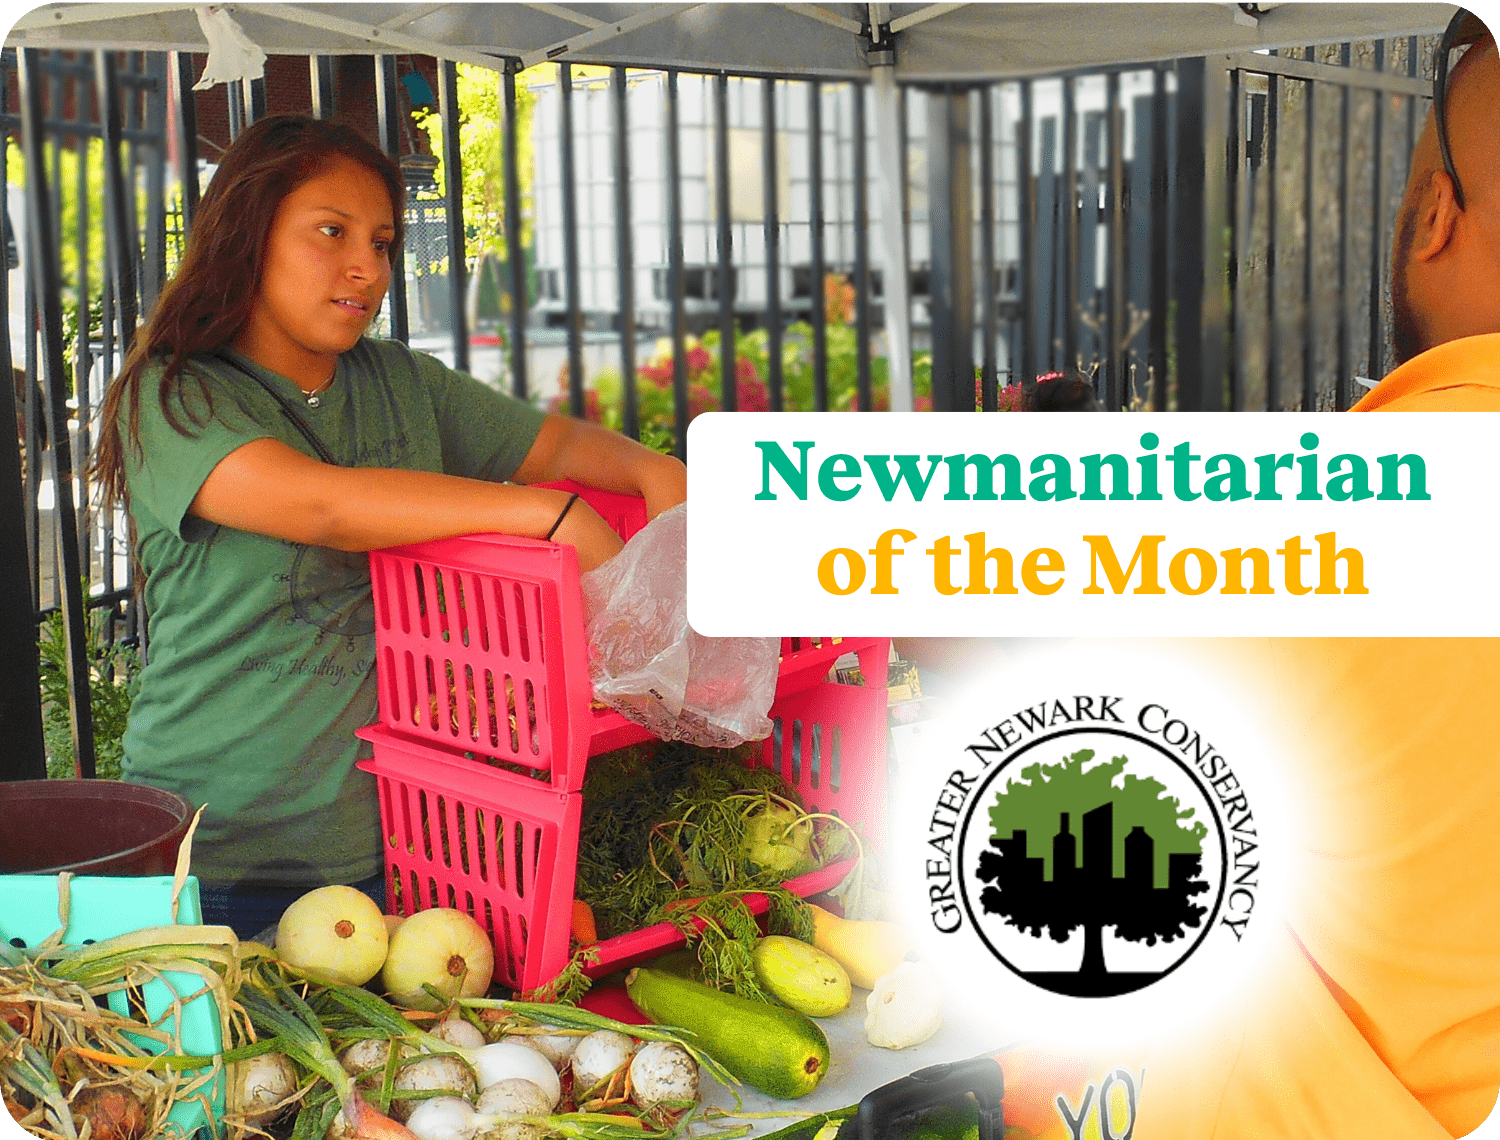 Greater Newark Conservancy - farmers market in action